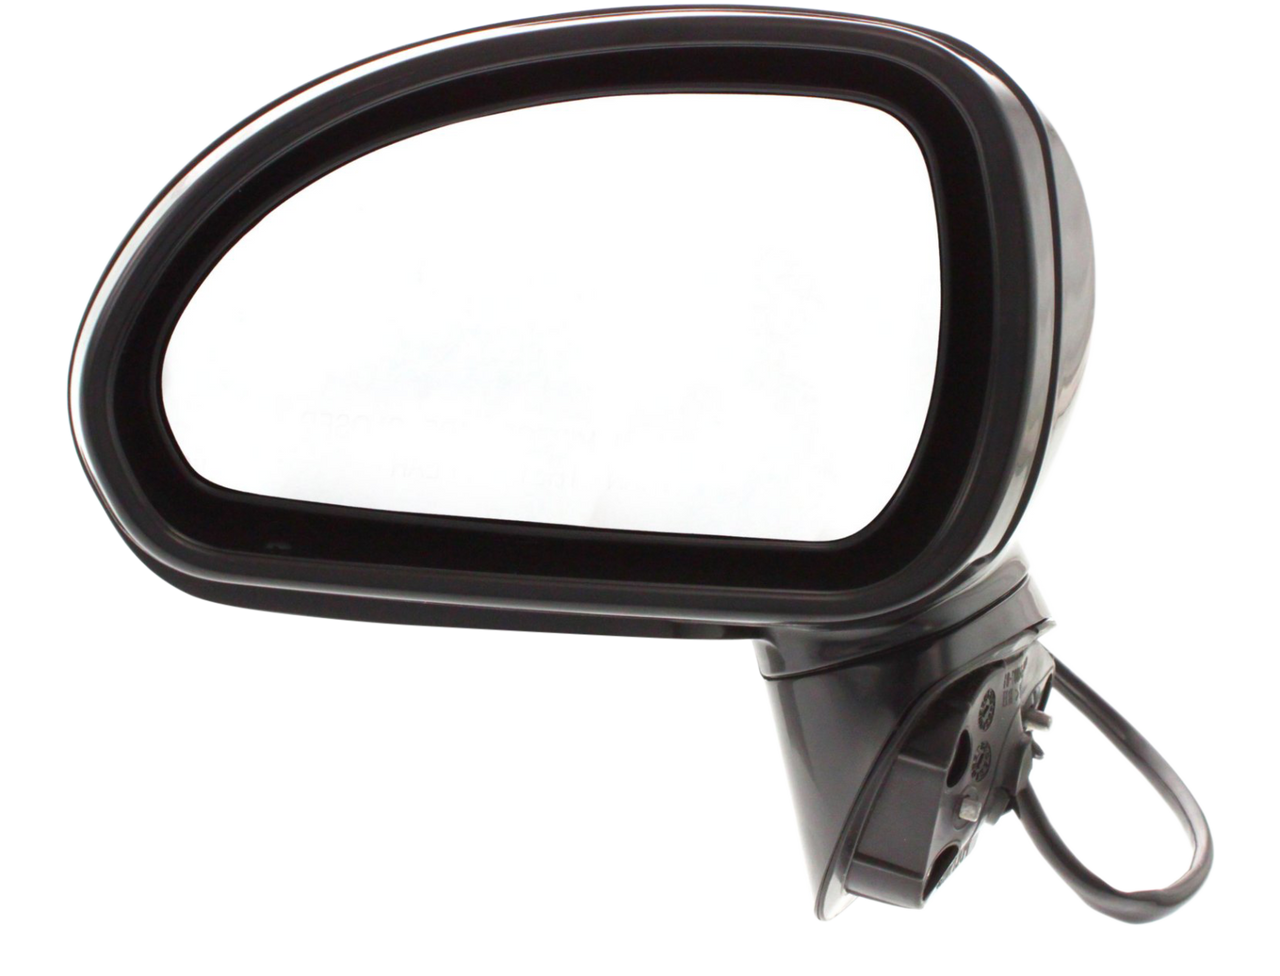 ECLIPSE 07-08 MIRROR LH, Power, Manual Folding, Heated, Paintable, w/o Auto Dimming, Blind Spot Detection, Memory, and Signal Light, Convertible/Coupe/Hatchback